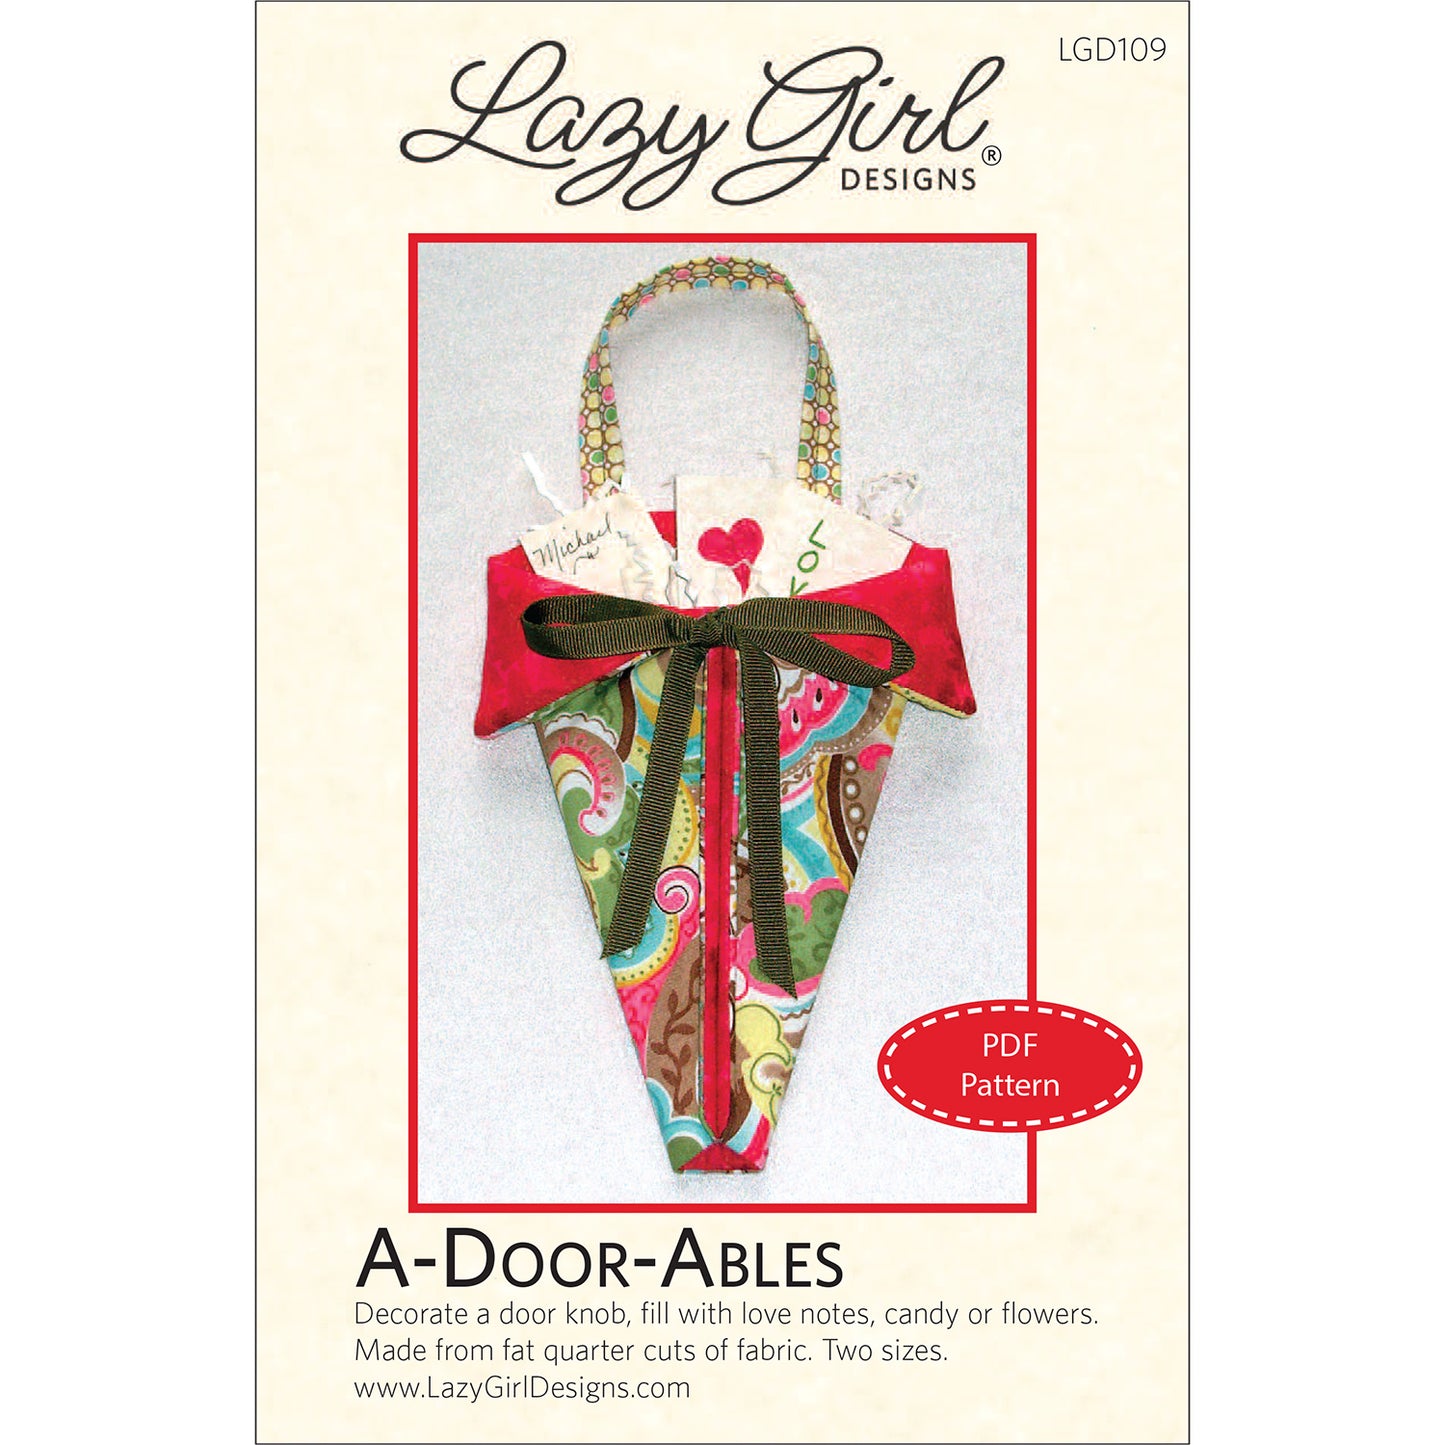 A-Door-Ables PDF Pattern